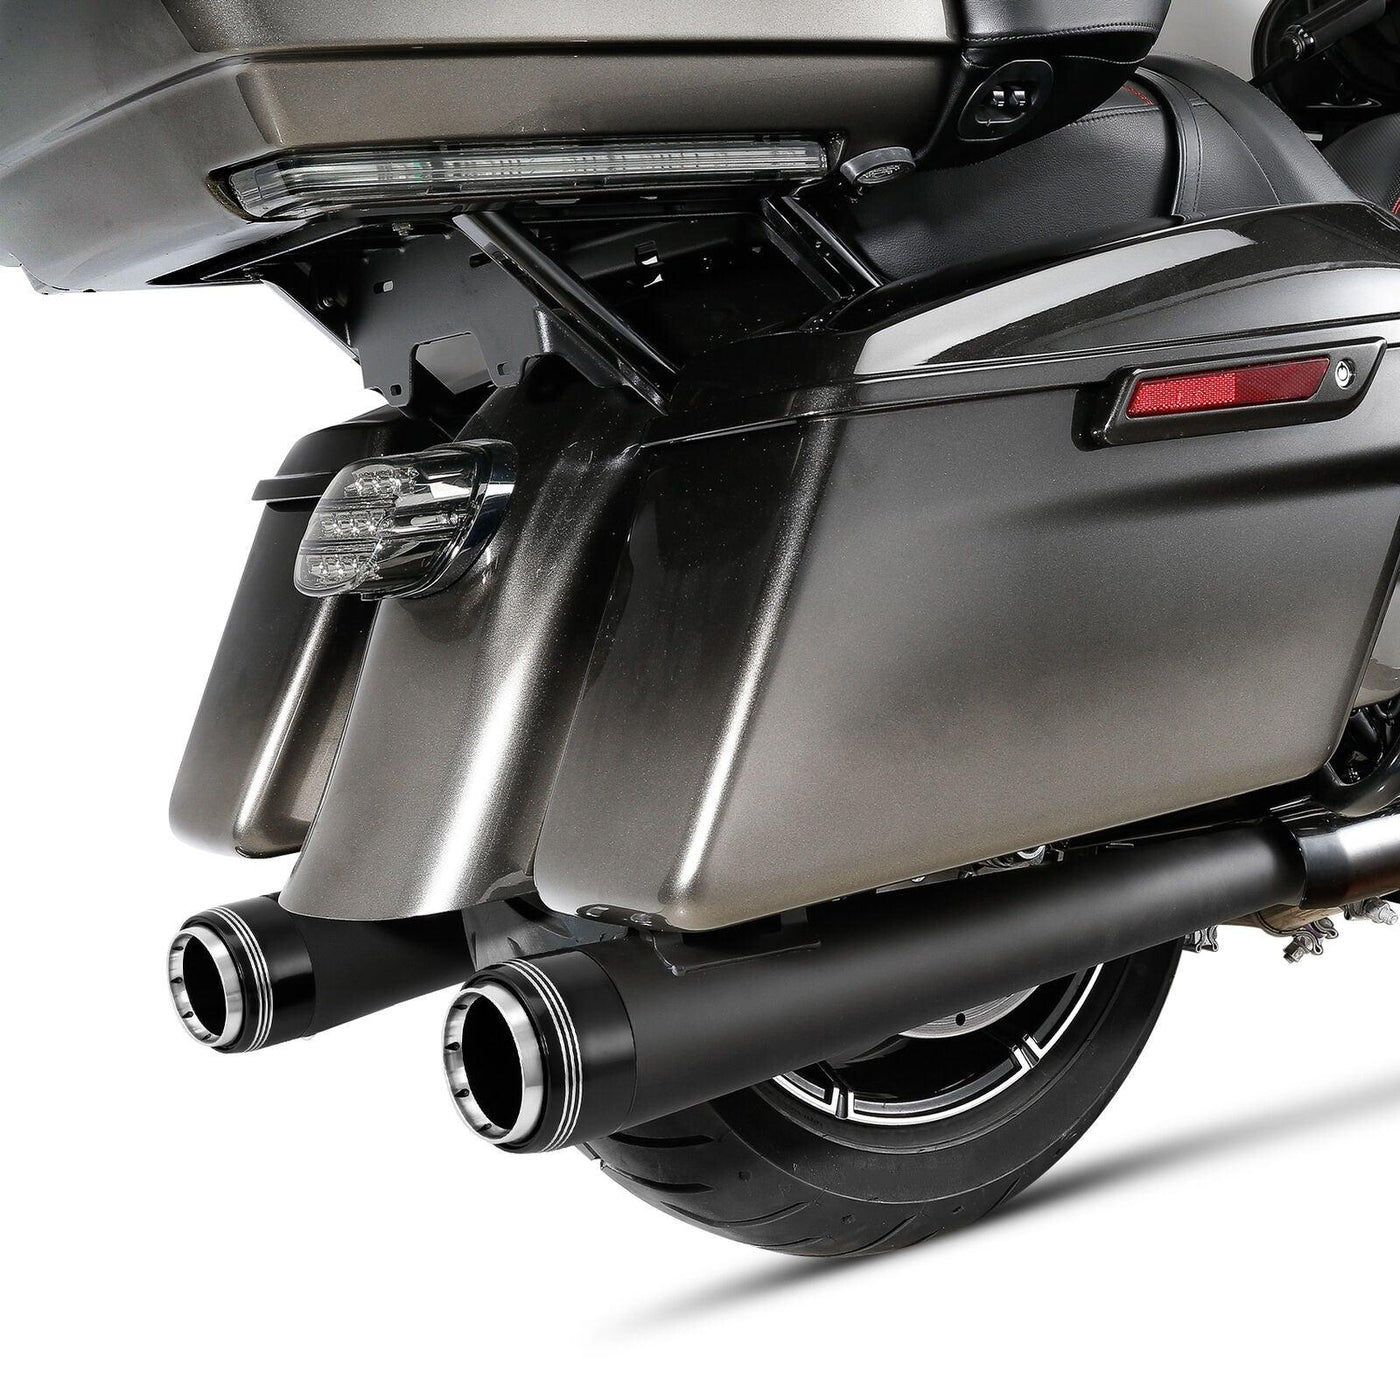 Black 4" Megaphone Slip-on Muffler Exhaust Pipes Fit For Harley Touring 17-21 20 - Moto Life Products